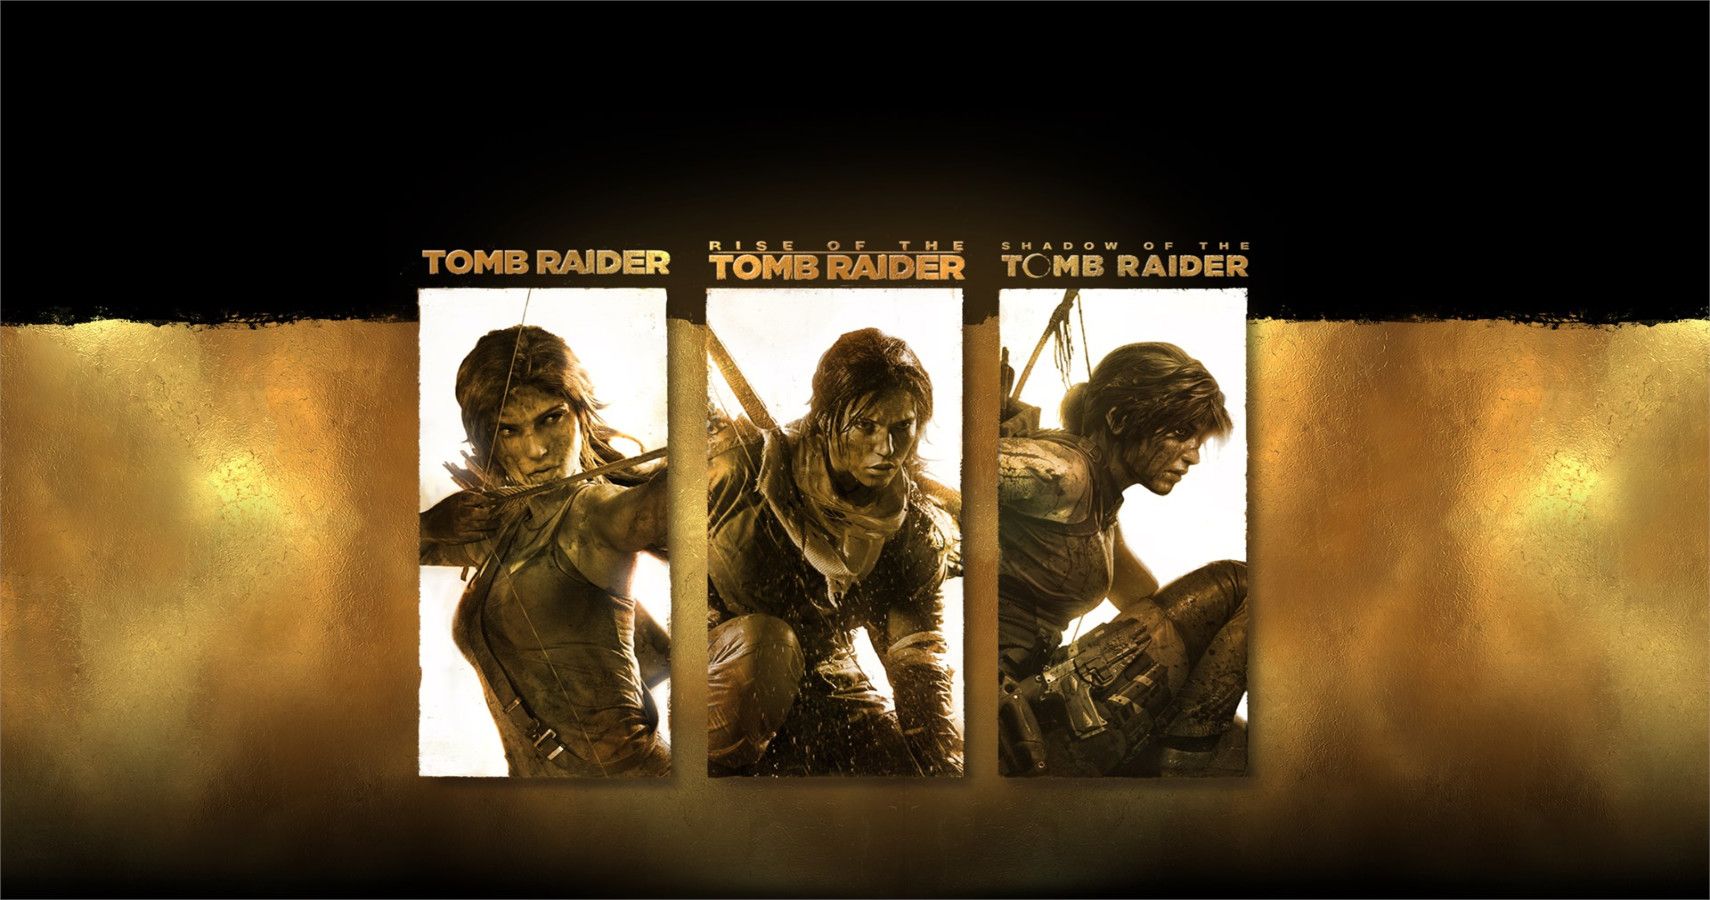 Tomb Raider Definitive Survivor Trilogy Is Available On PSN And Microsoft Store Gets 60% Discount